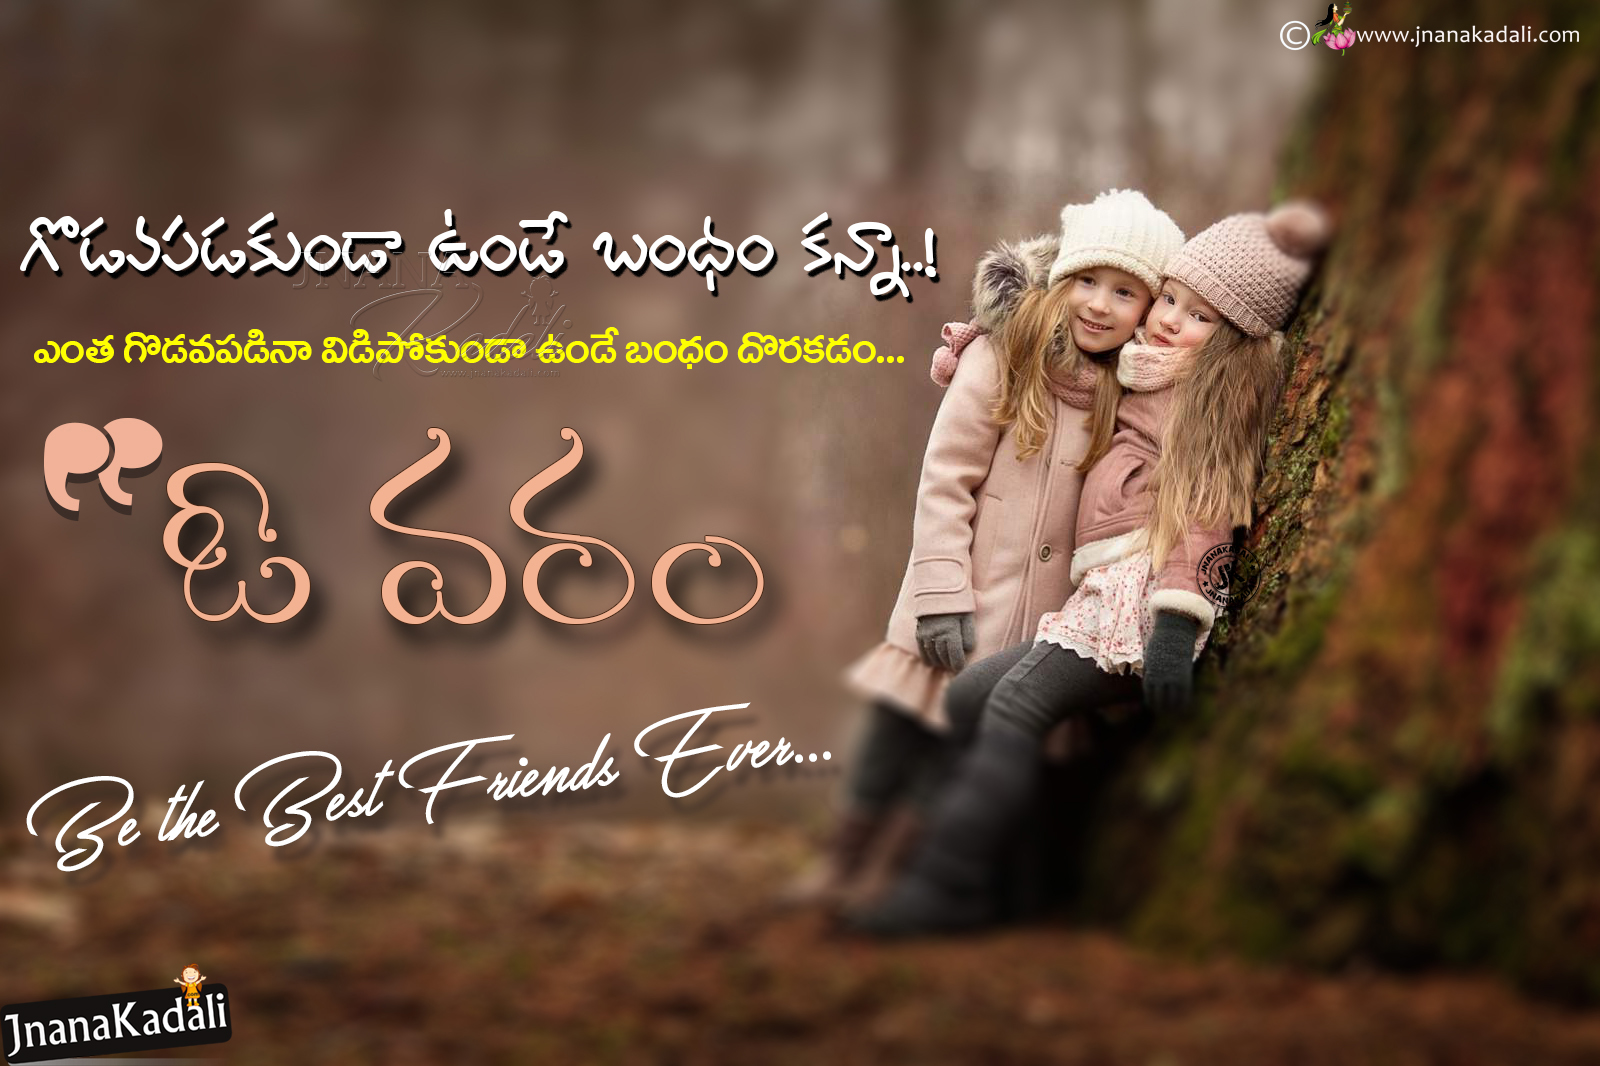 Cute Children Hd Wallpapers Free Download, Relationship - Friendship Day Quotes In Telugu - HD Wallpaper 